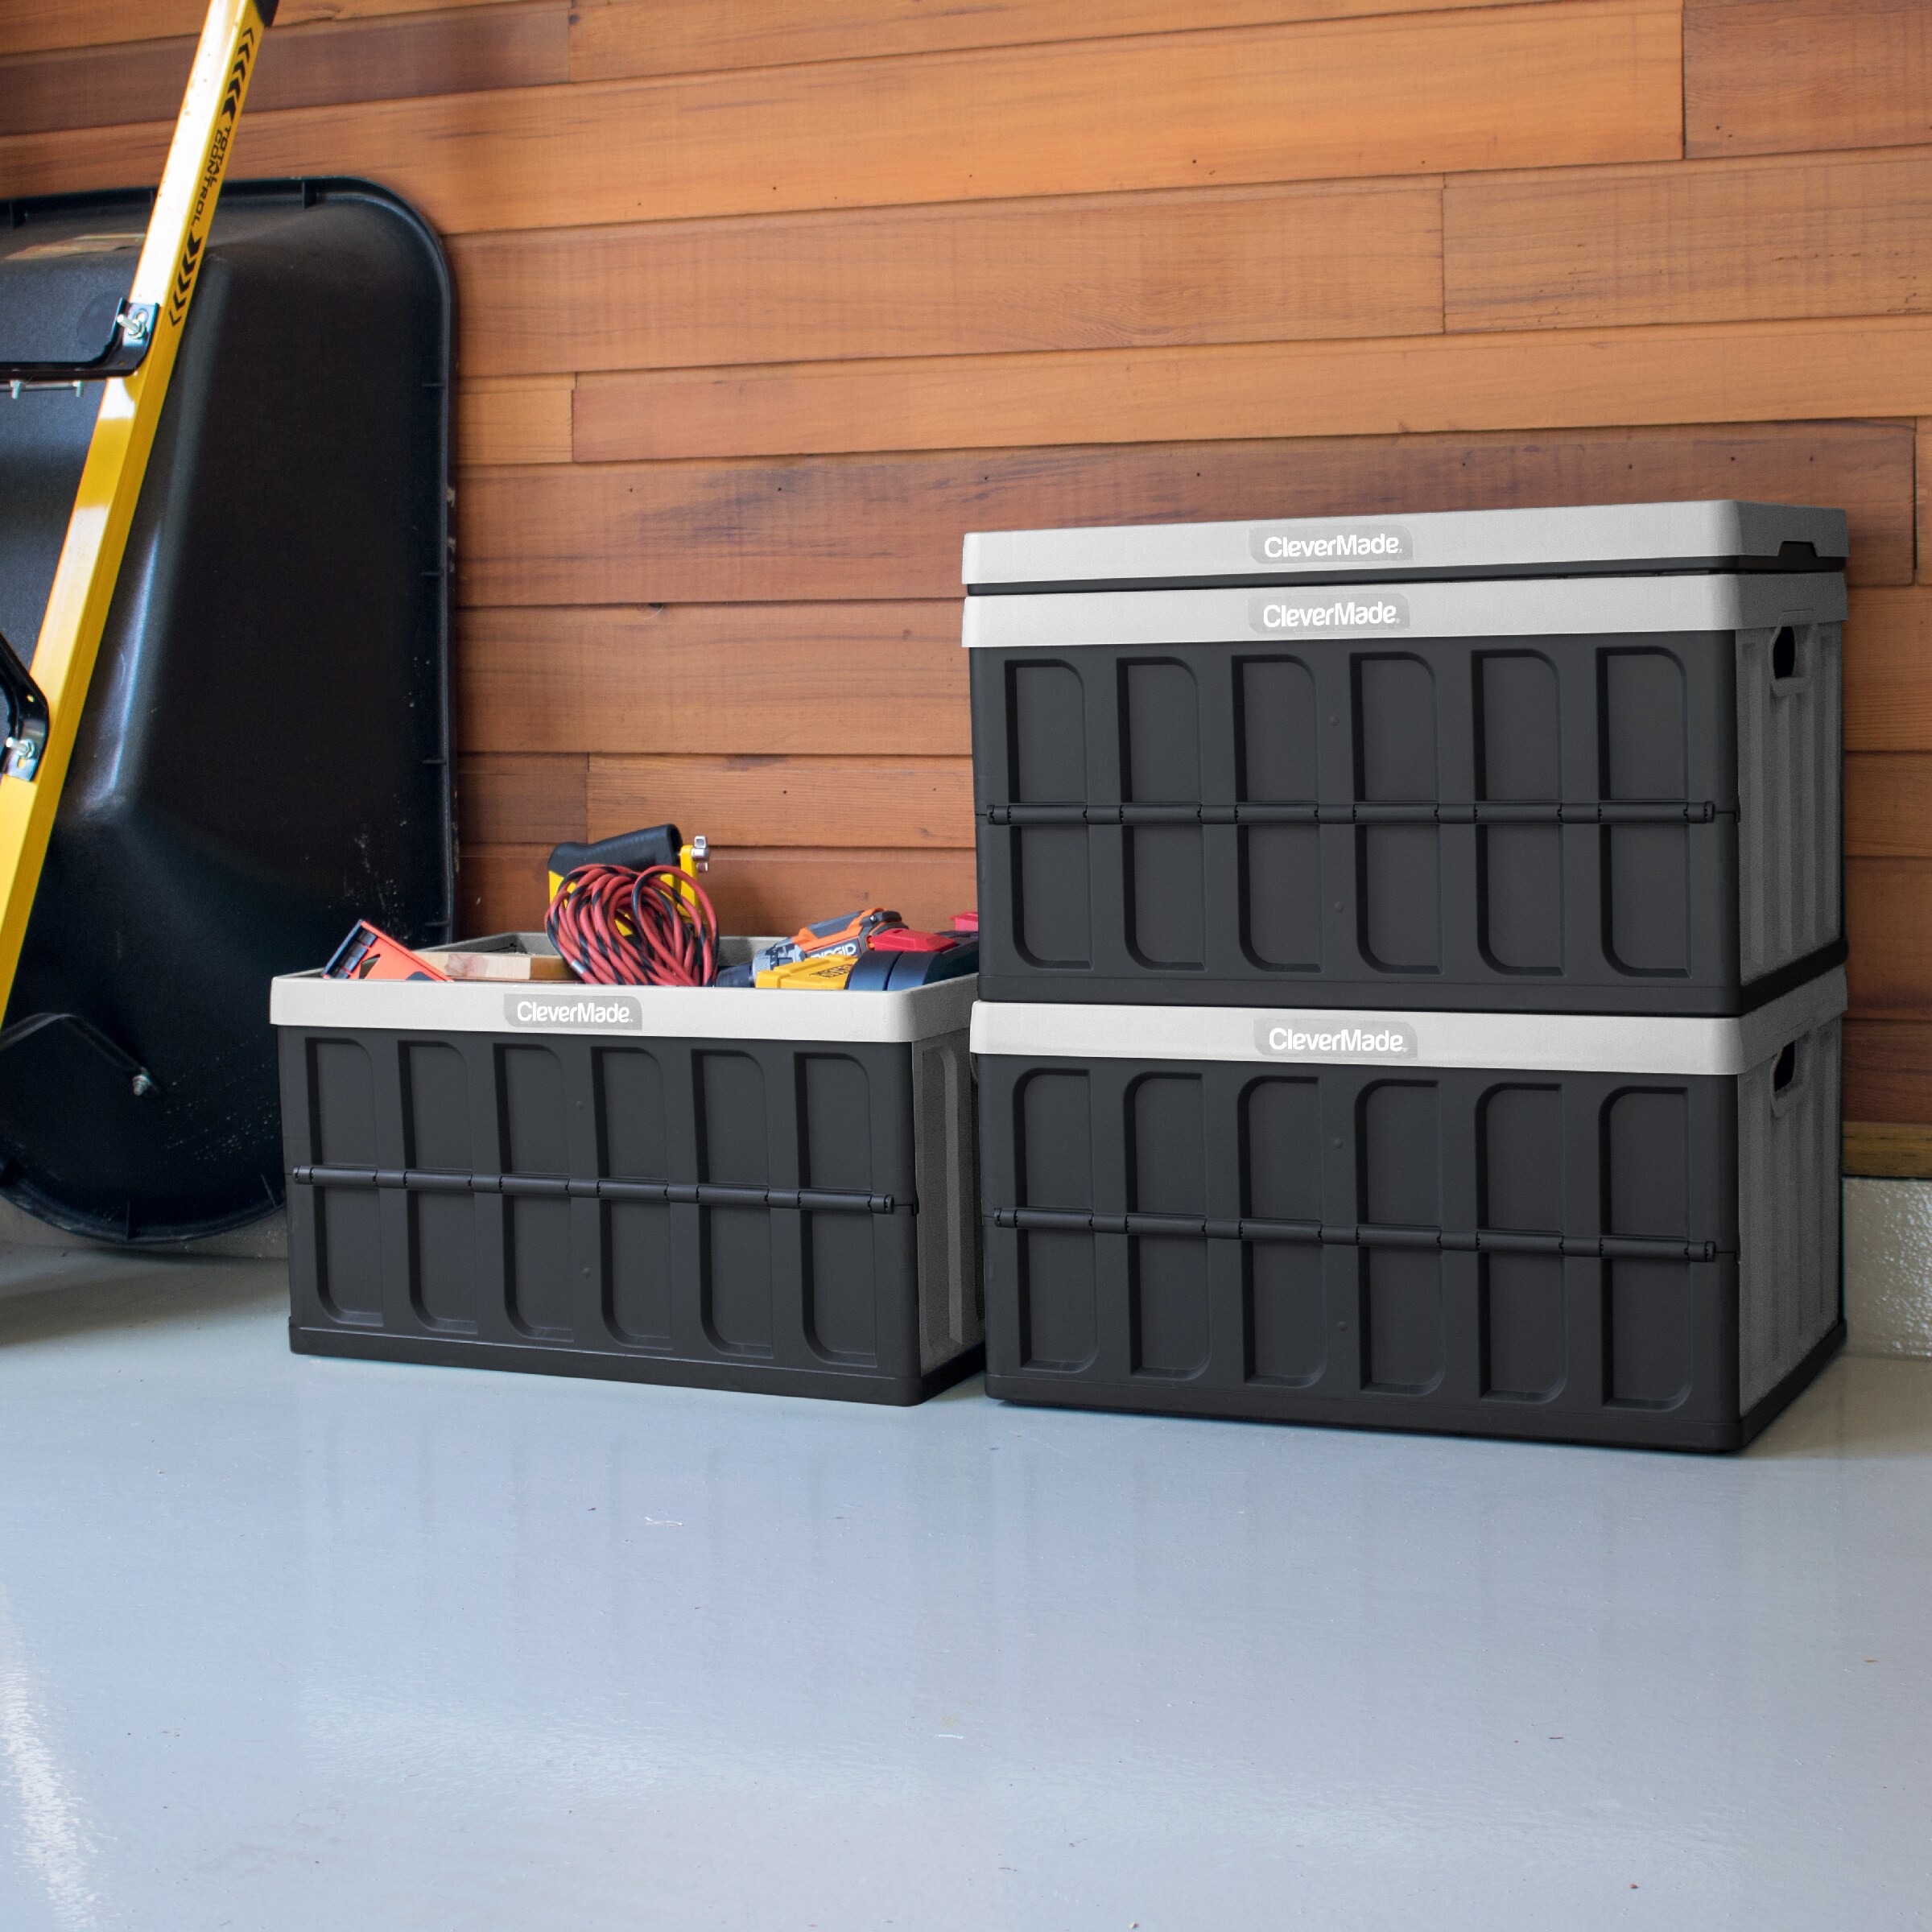 CleverMade 62L Collapsible, Stackable, Plastic Storage Bins